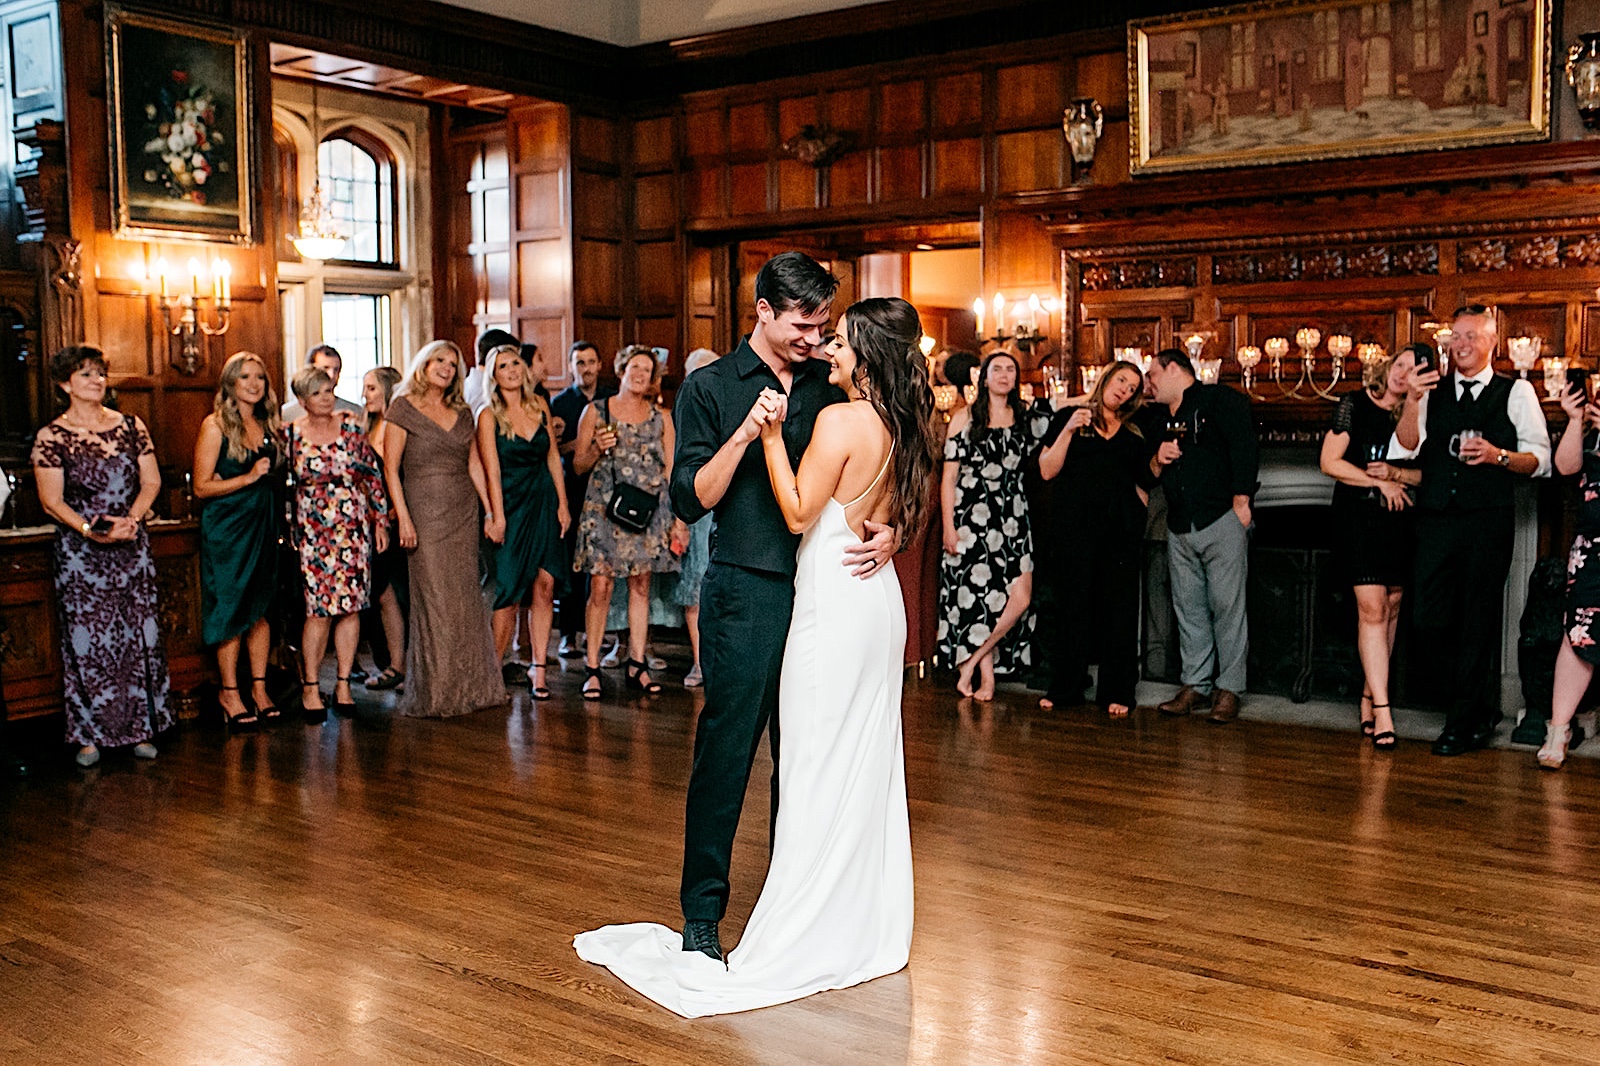 Summer wedding at Thornewood Castle: bride and groom have first dance at reception.